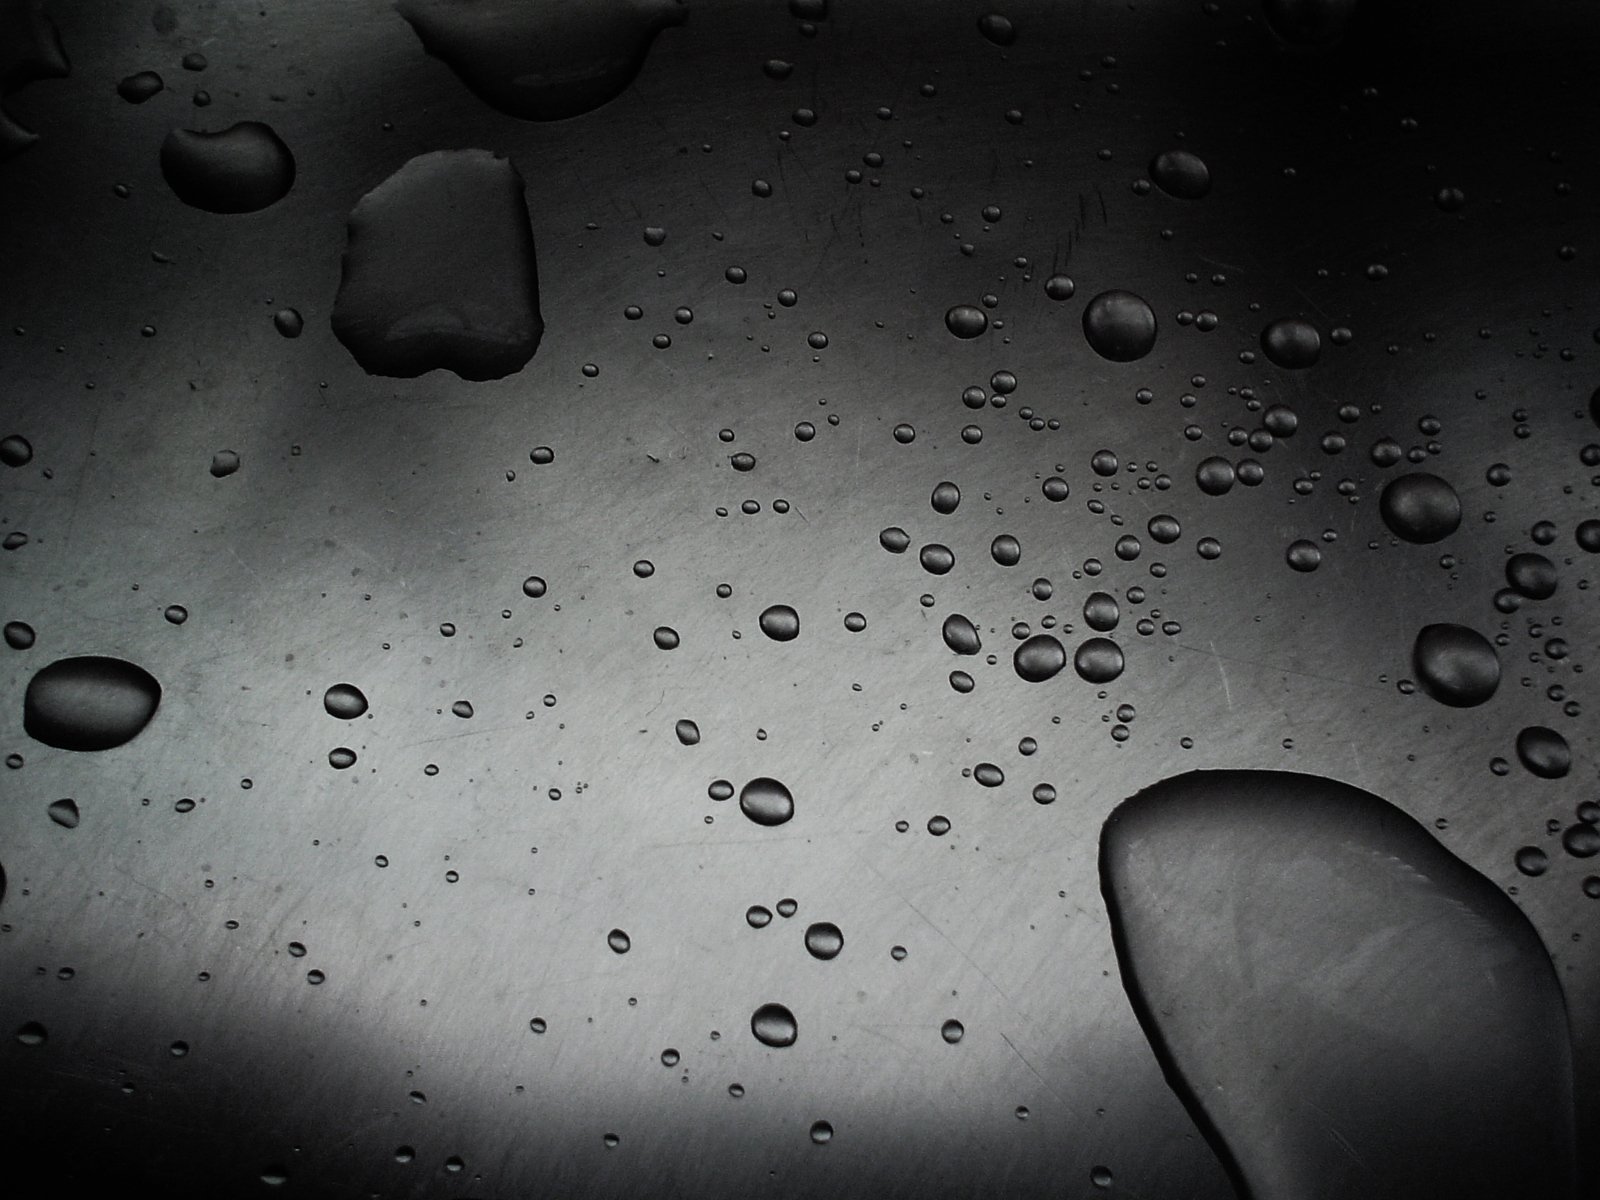 a black and white po shows water droplets on the surface